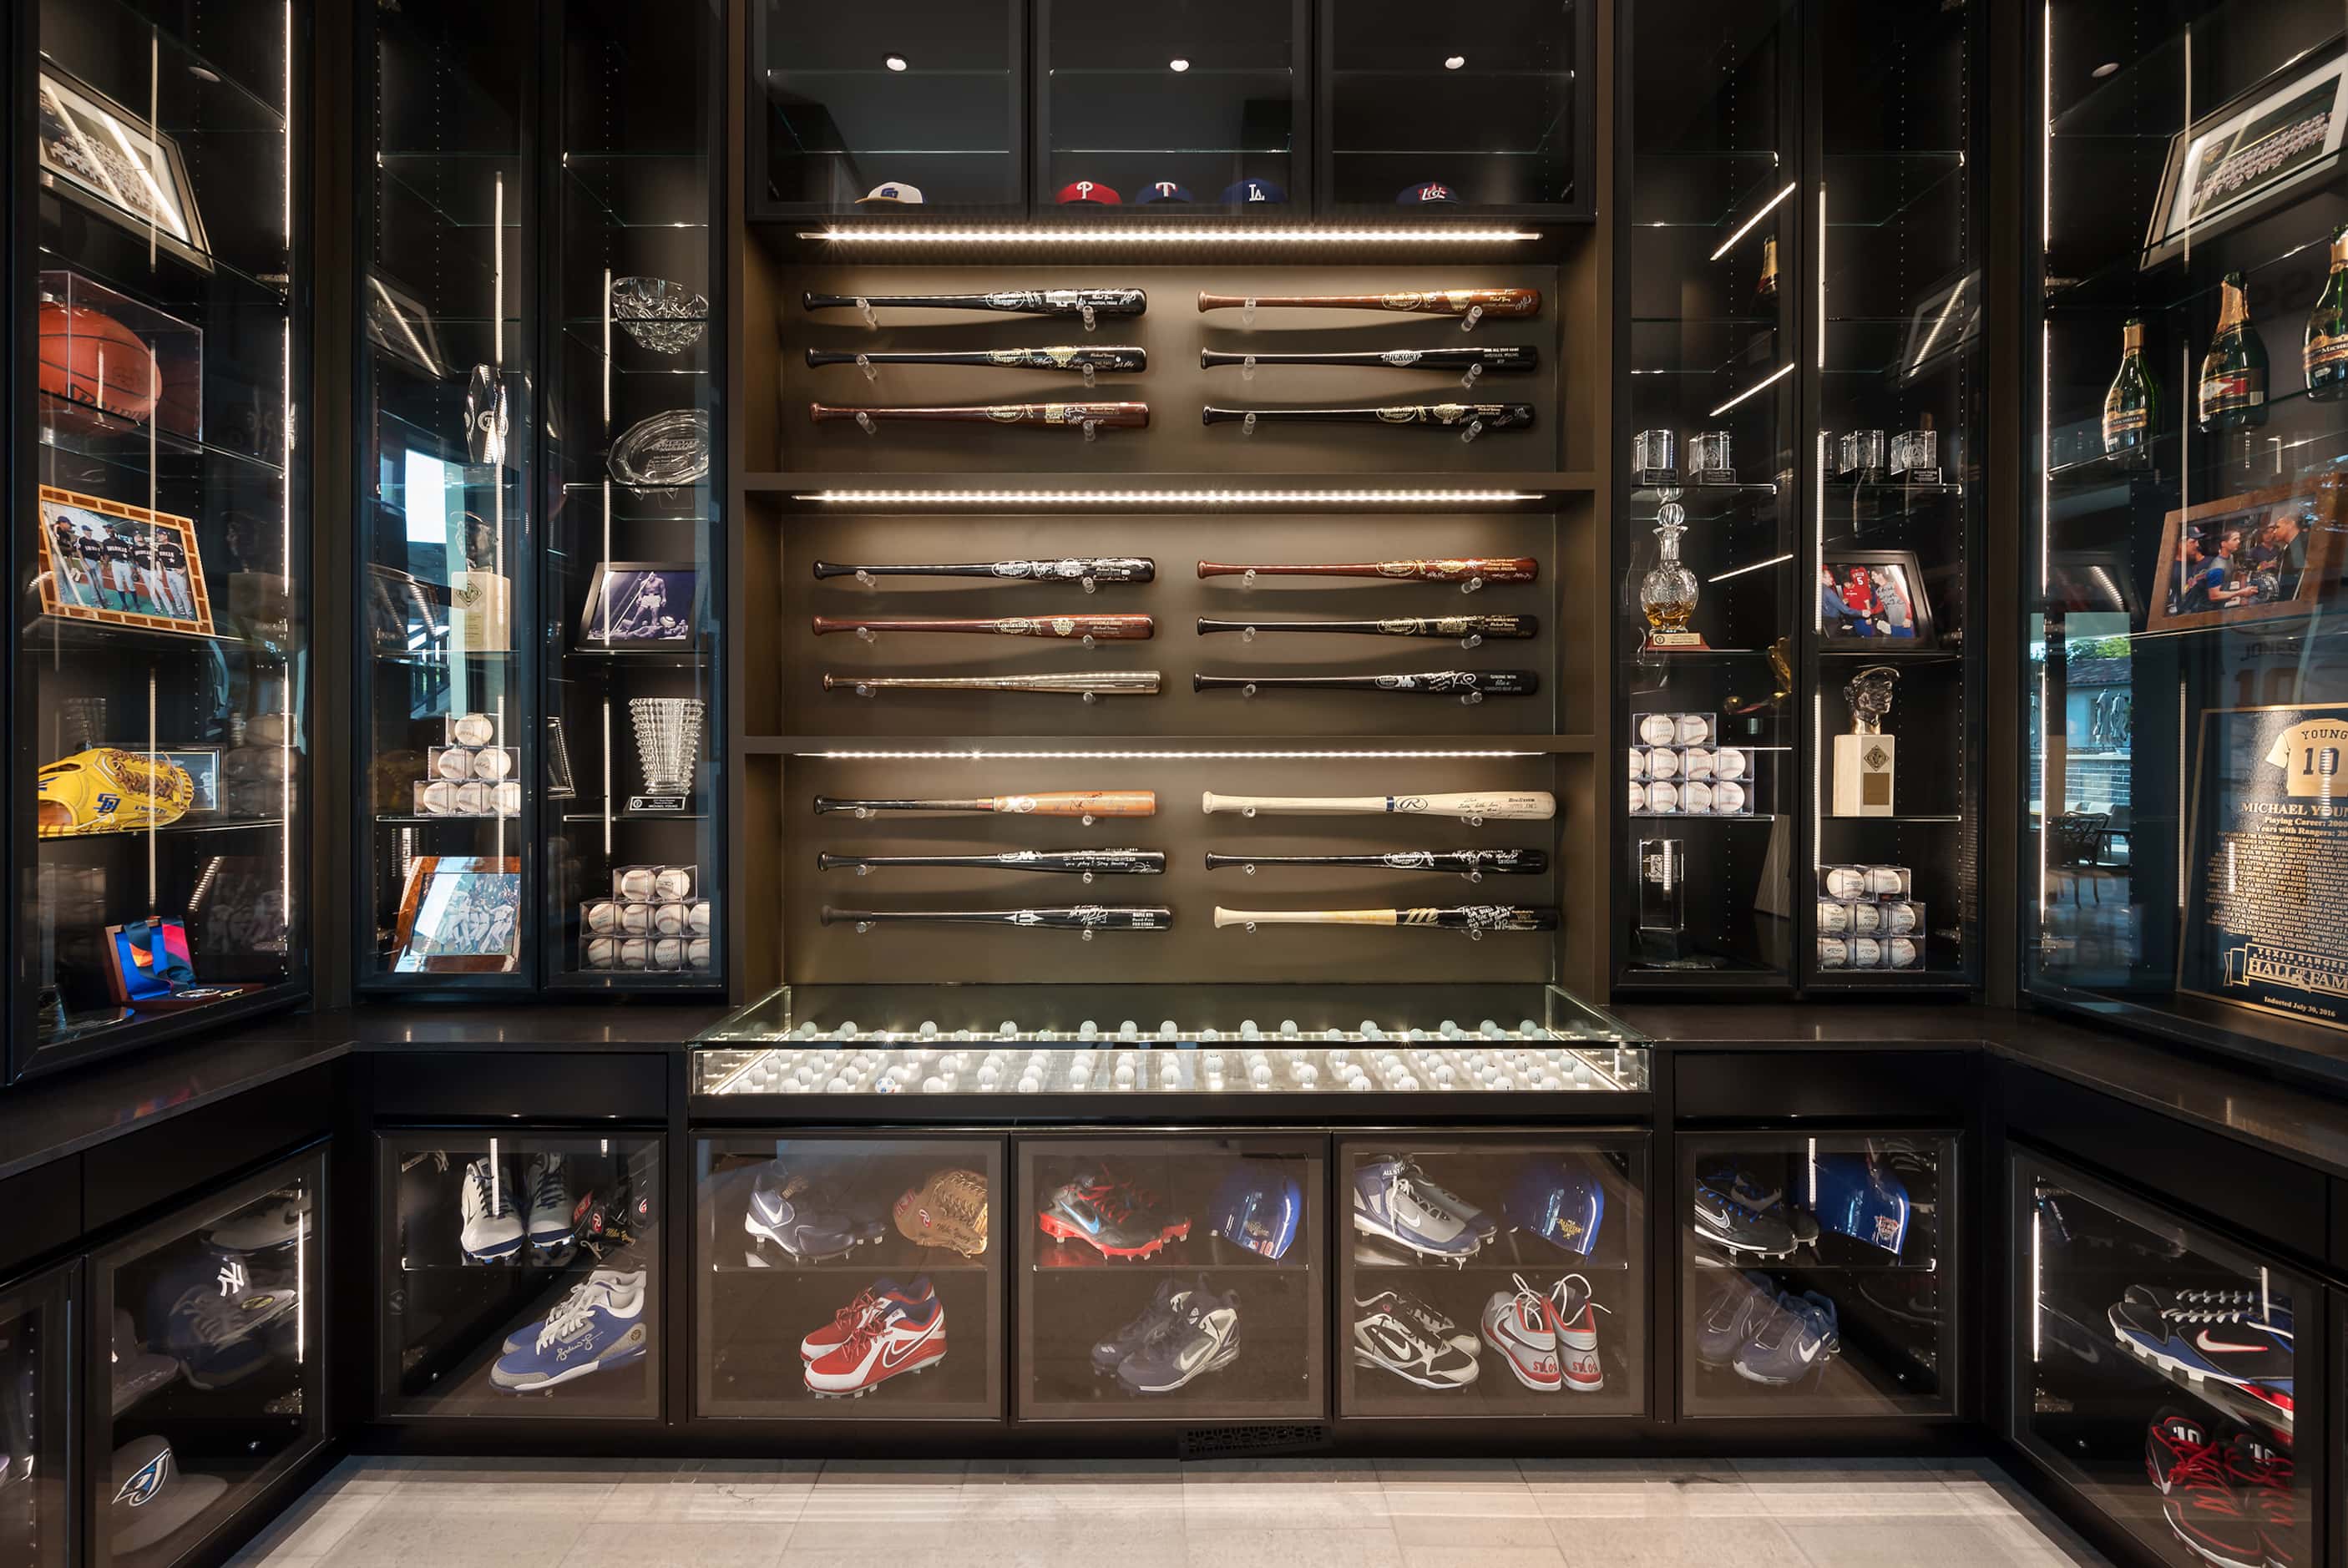 Display cabinets show off a collection of sports memorabilia, including baseballs, bats and...